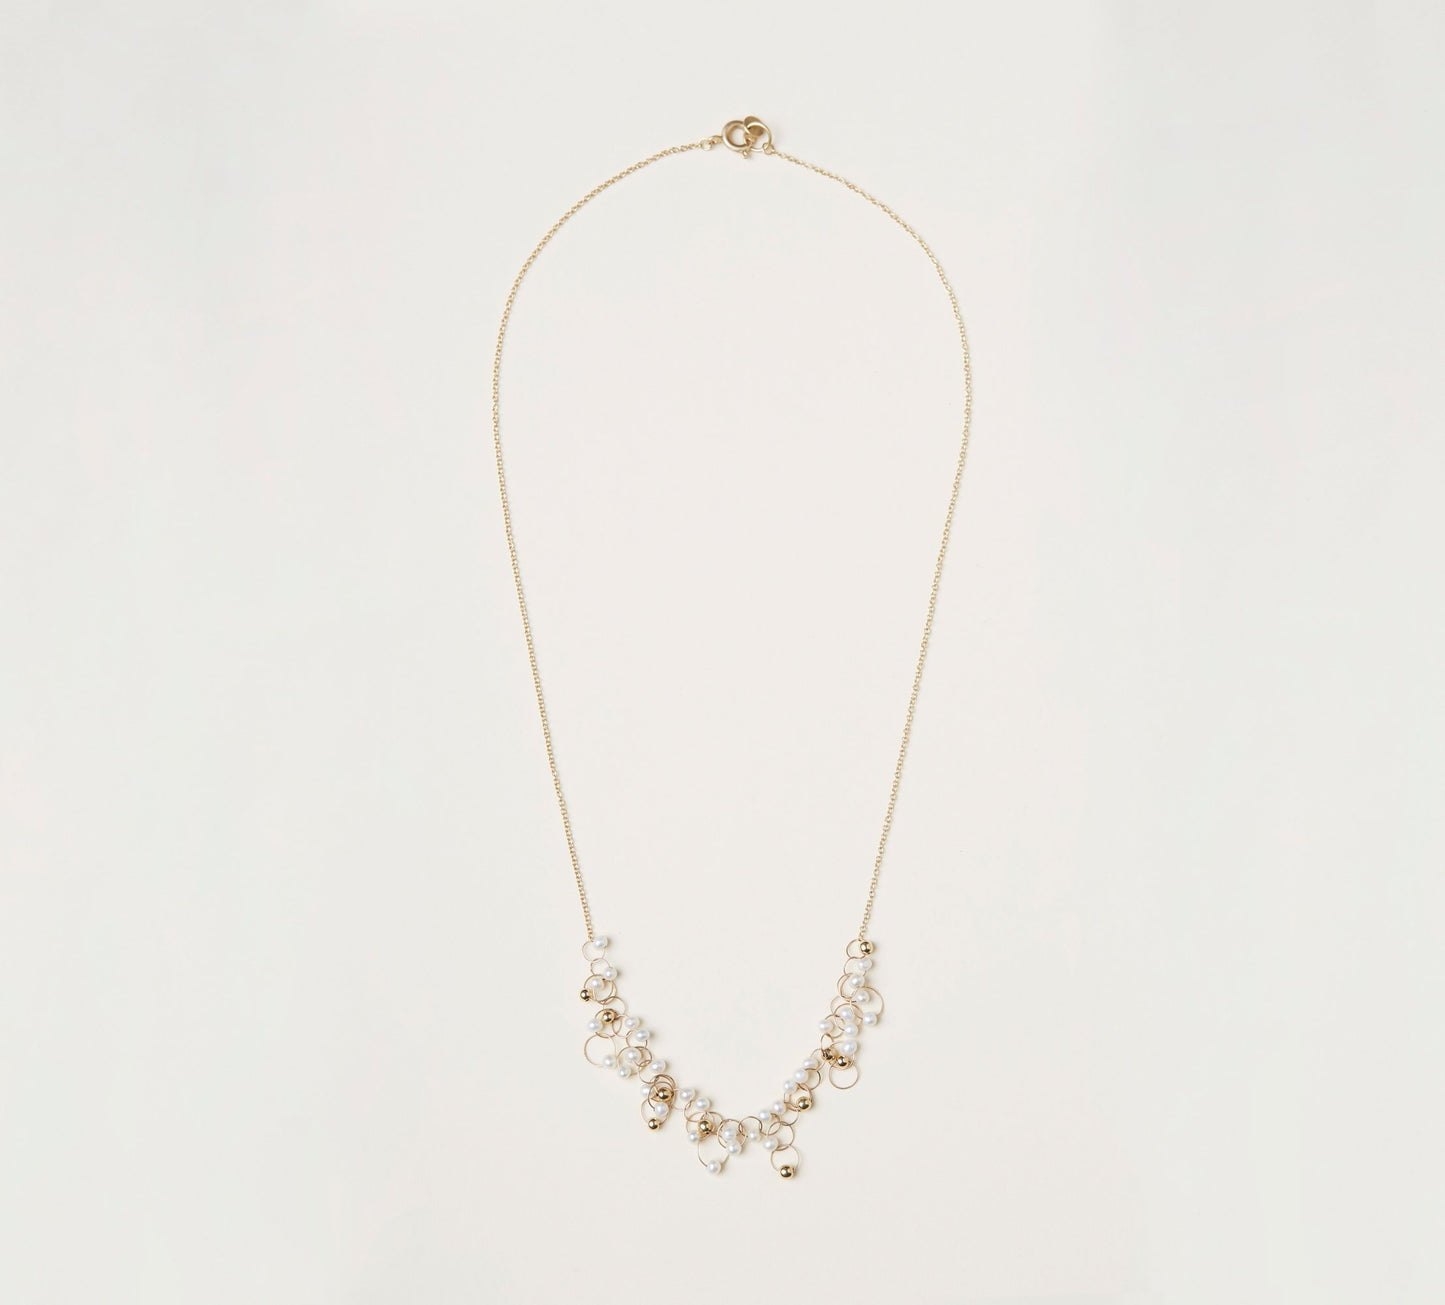 18KT yellow gold necklace with freshwater pearls - Infinito 02N